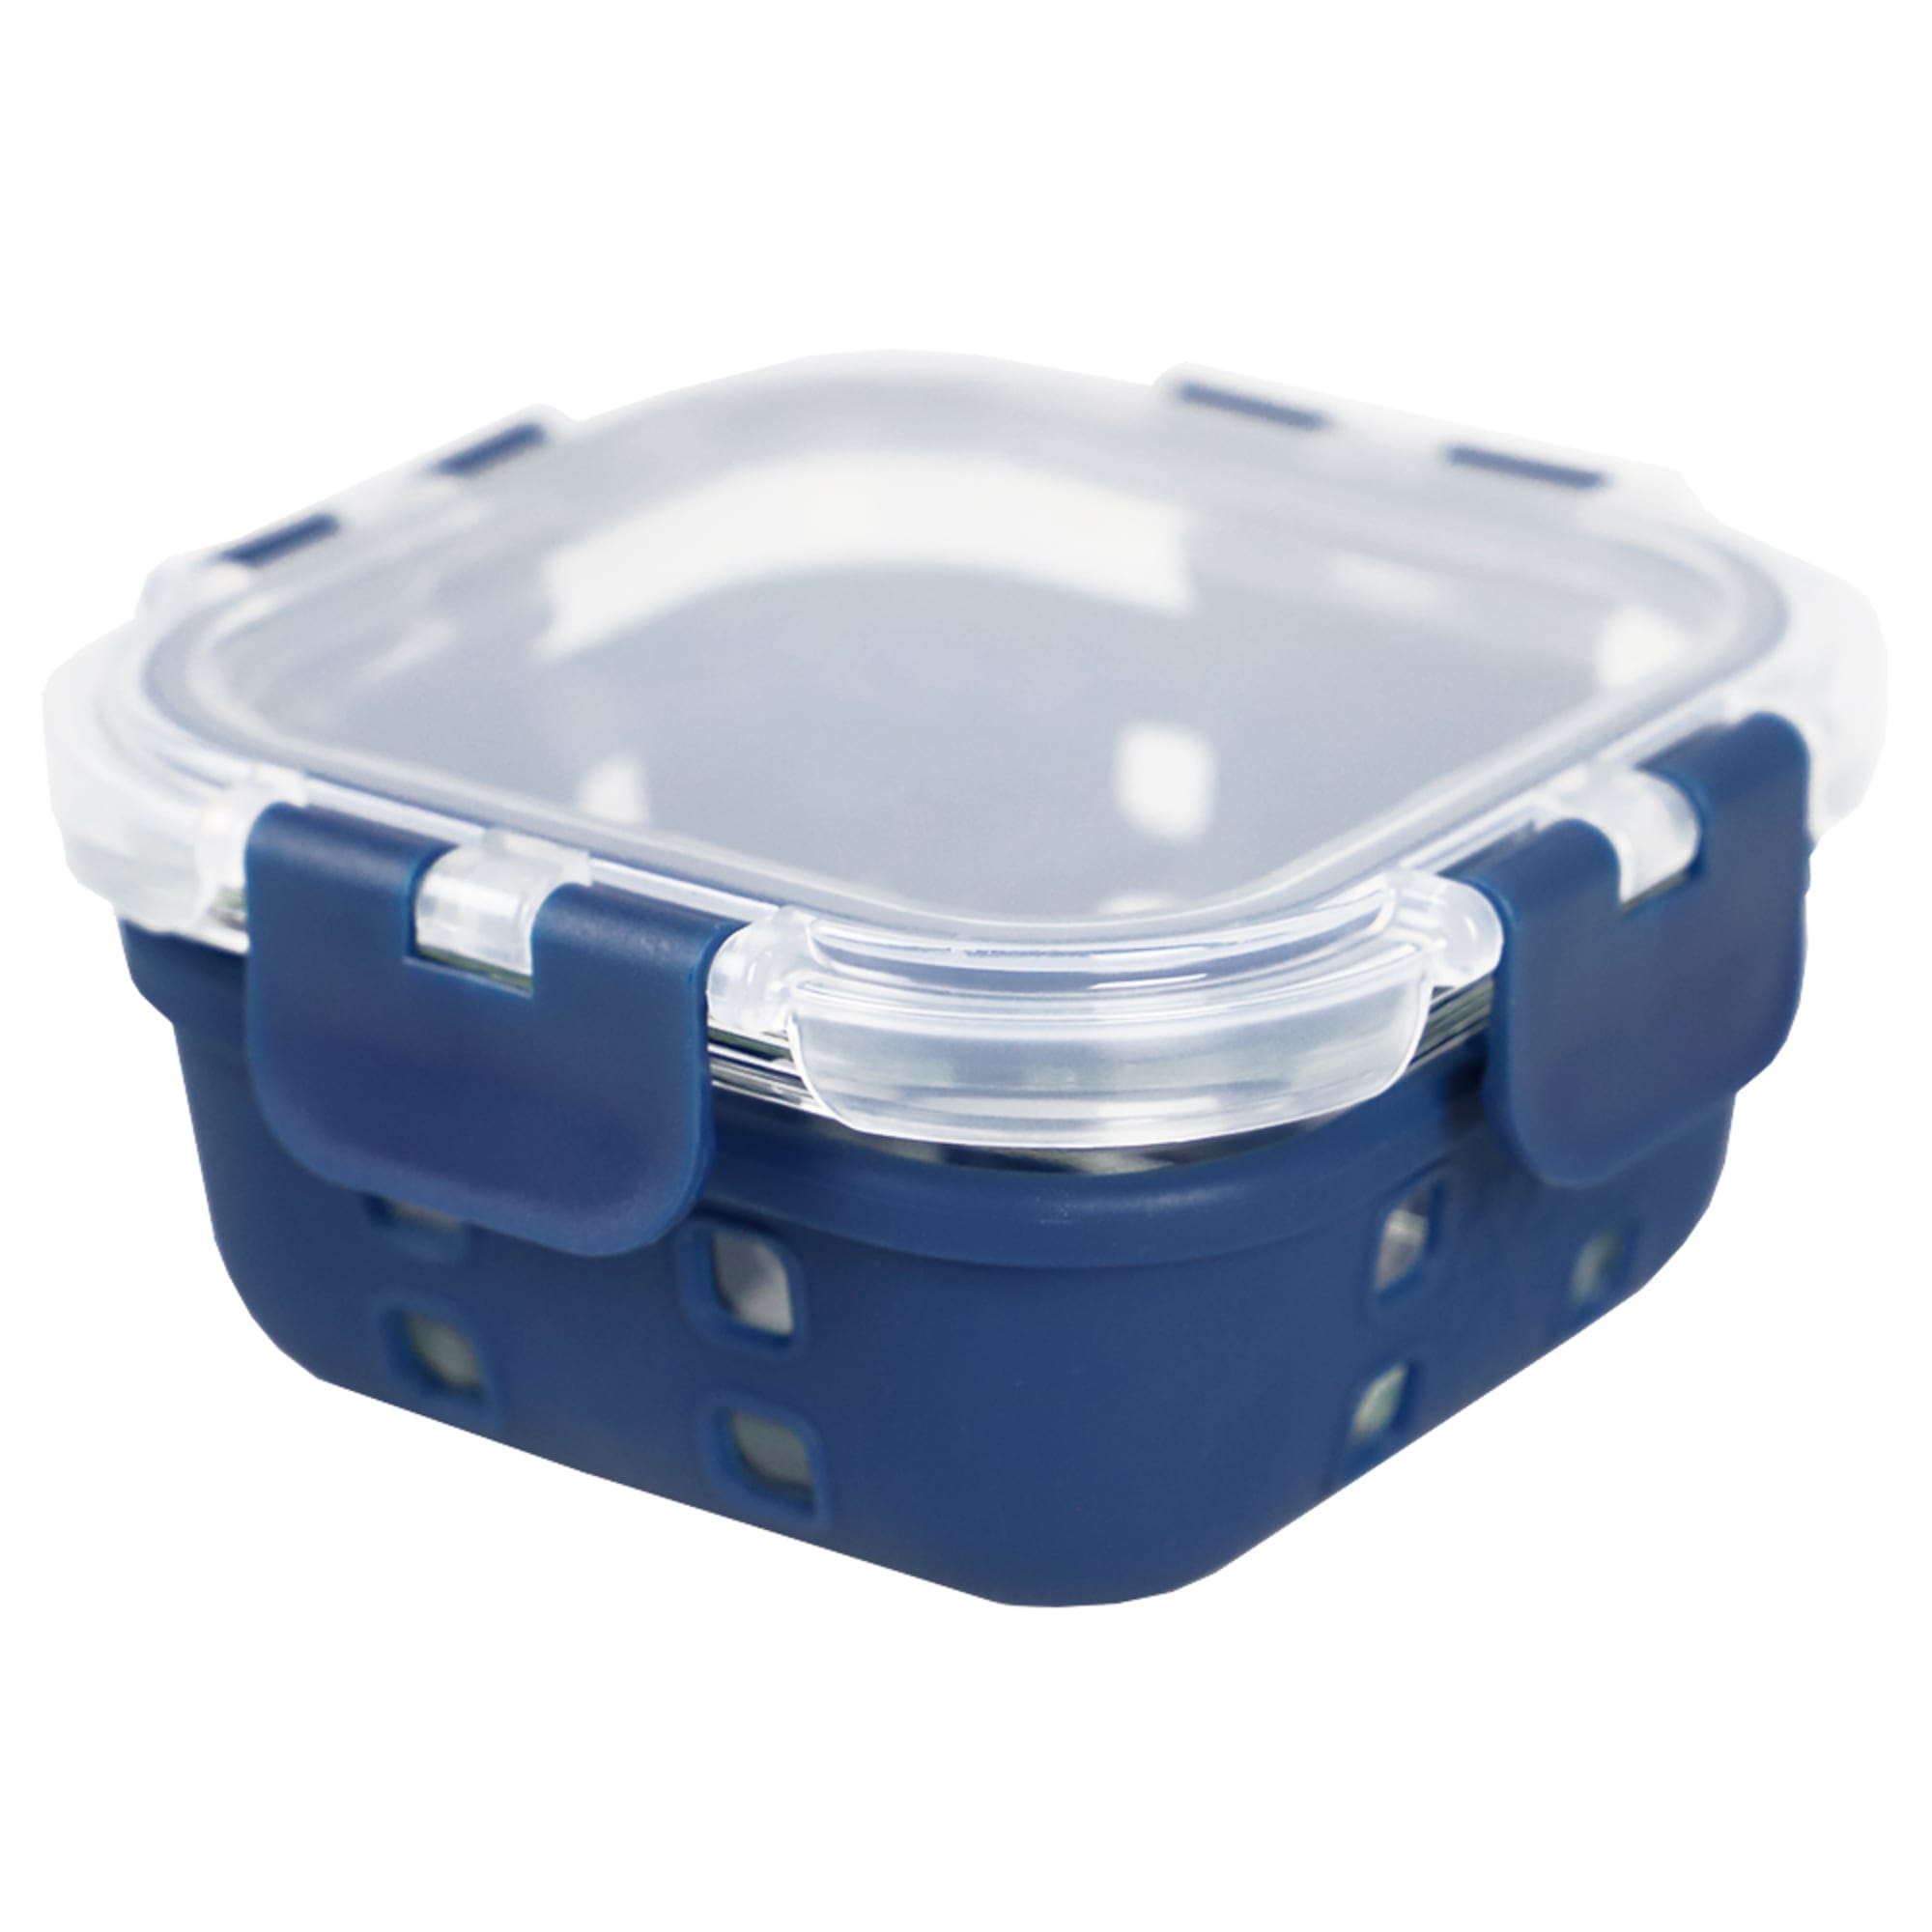 Michael Graves Design Square 13 Ounce High Borosilicate Glass Food Storage Container with Plastic Lid, Indigo $5.00 EACH, CASE PACK OF 12